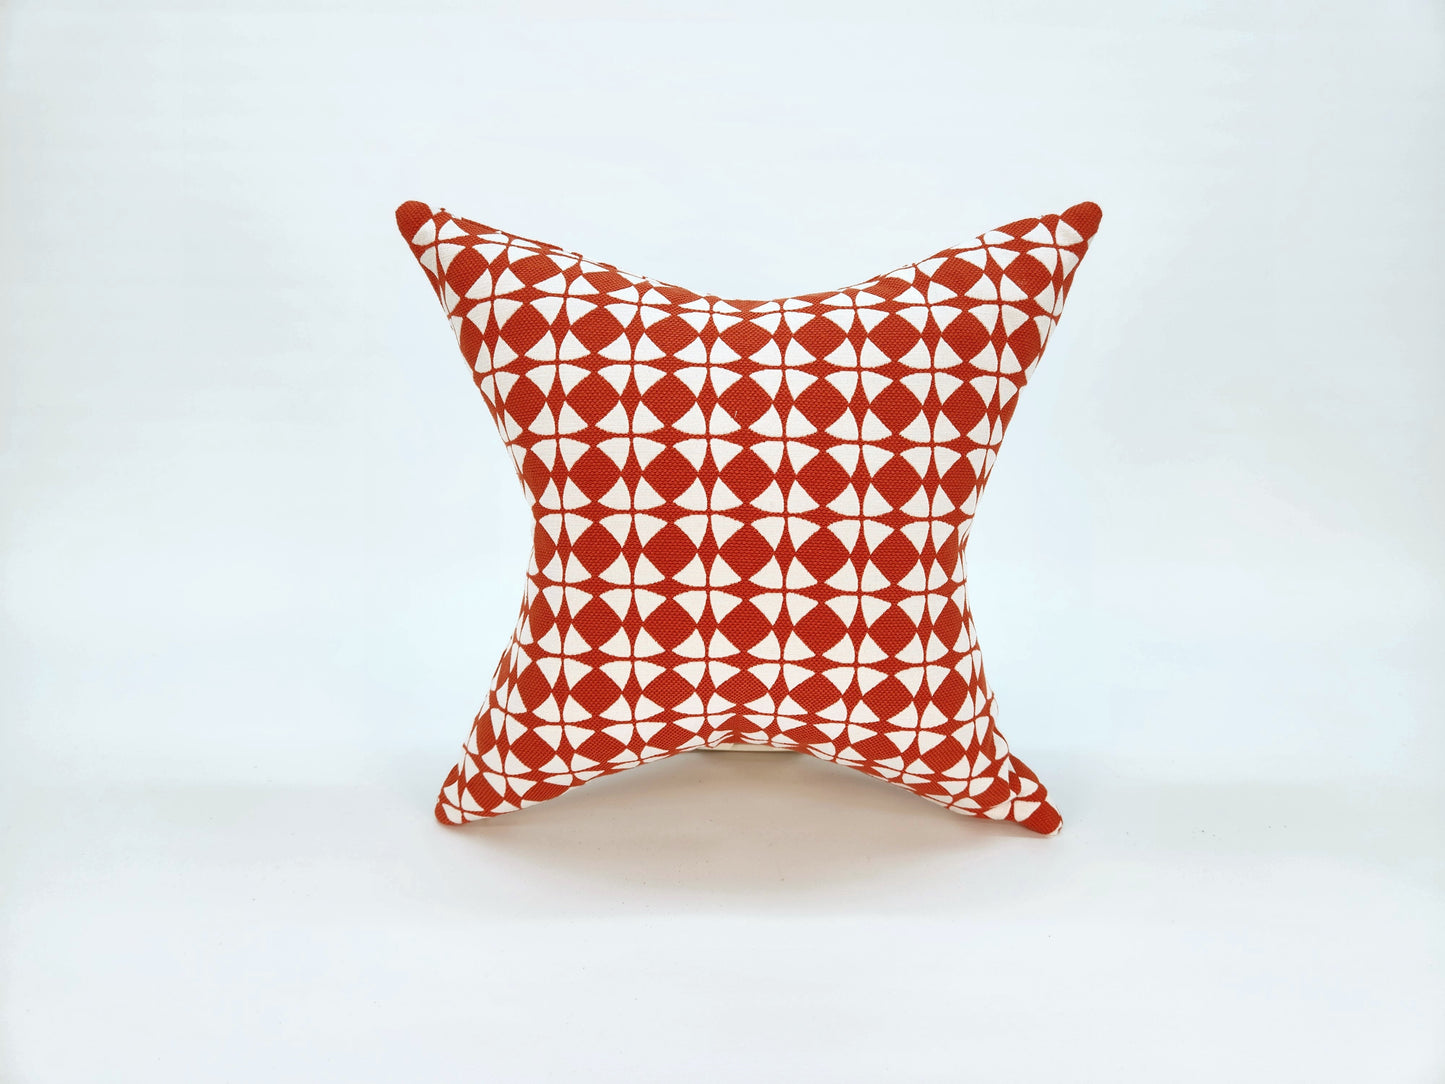 Explorer58 Star Shaped Pillow Cover, Thruster Red, with or without Feather Insert. Handmade by Houston and Scott